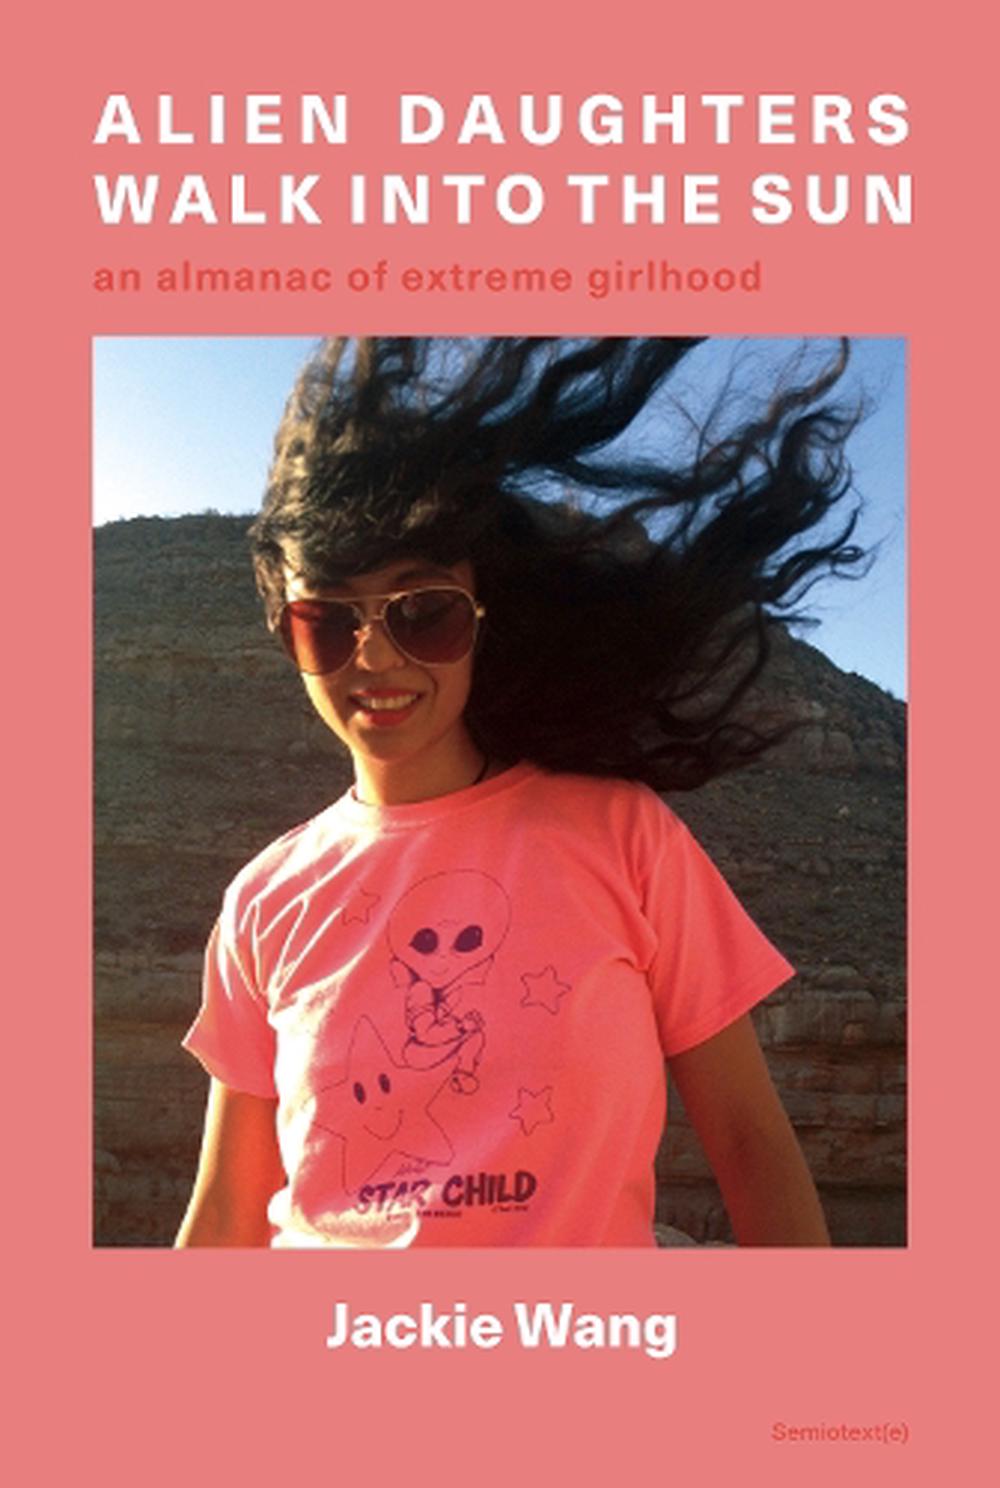 A book cover showing a photograph of a young Asian girl with windswept long black hair, wearing a pink shirt and sunglasses